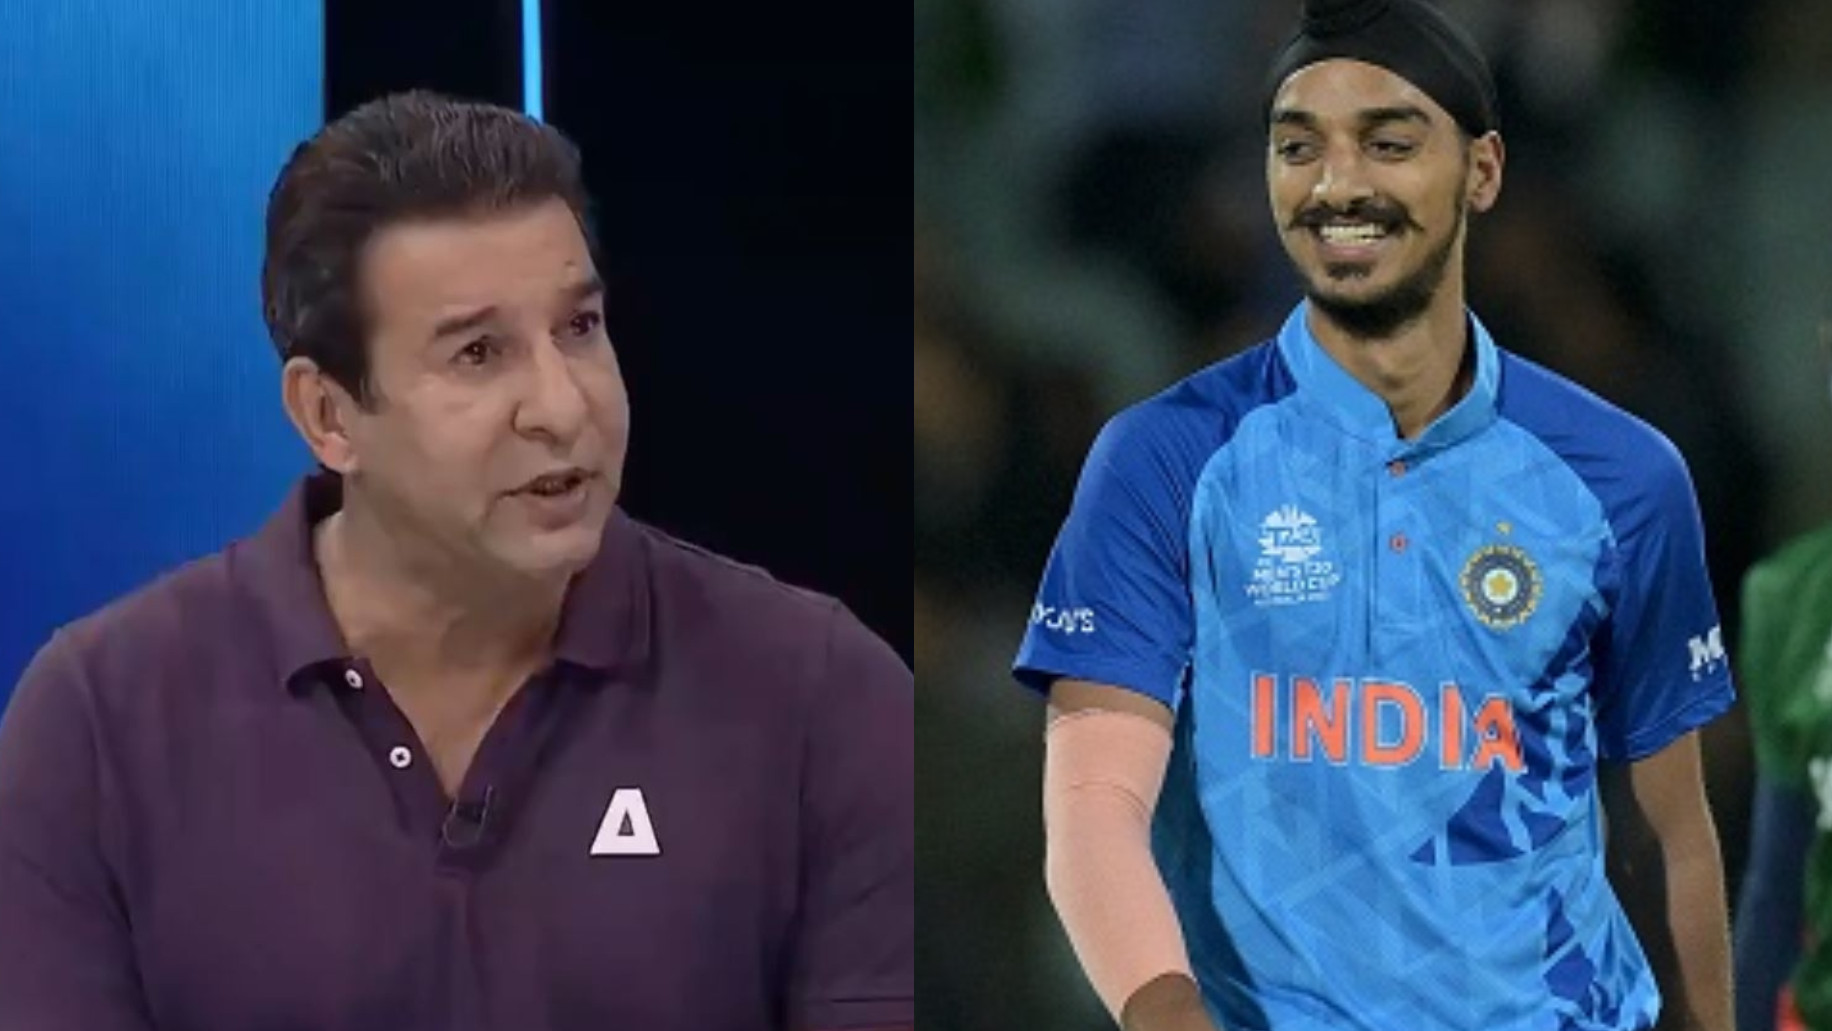 T20 World Cup 2022: “Waqar and I saw his talent in the Asia Cup”- Wasim Akram praises Arshdeep Singh